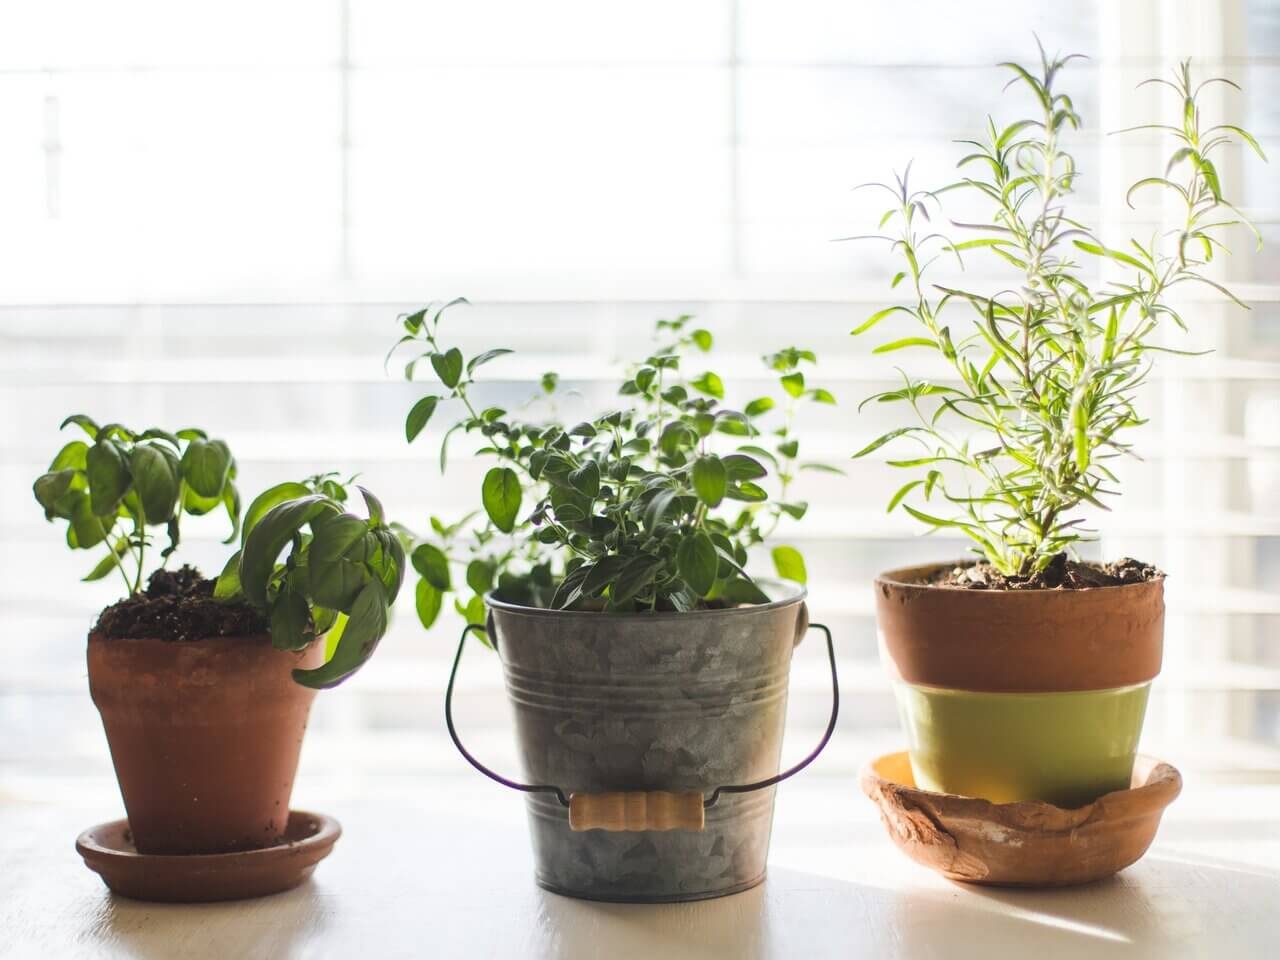 To grow herbs indoors they may be grown in terracotta pots with saucers and galvanized metal pots like these three plants.